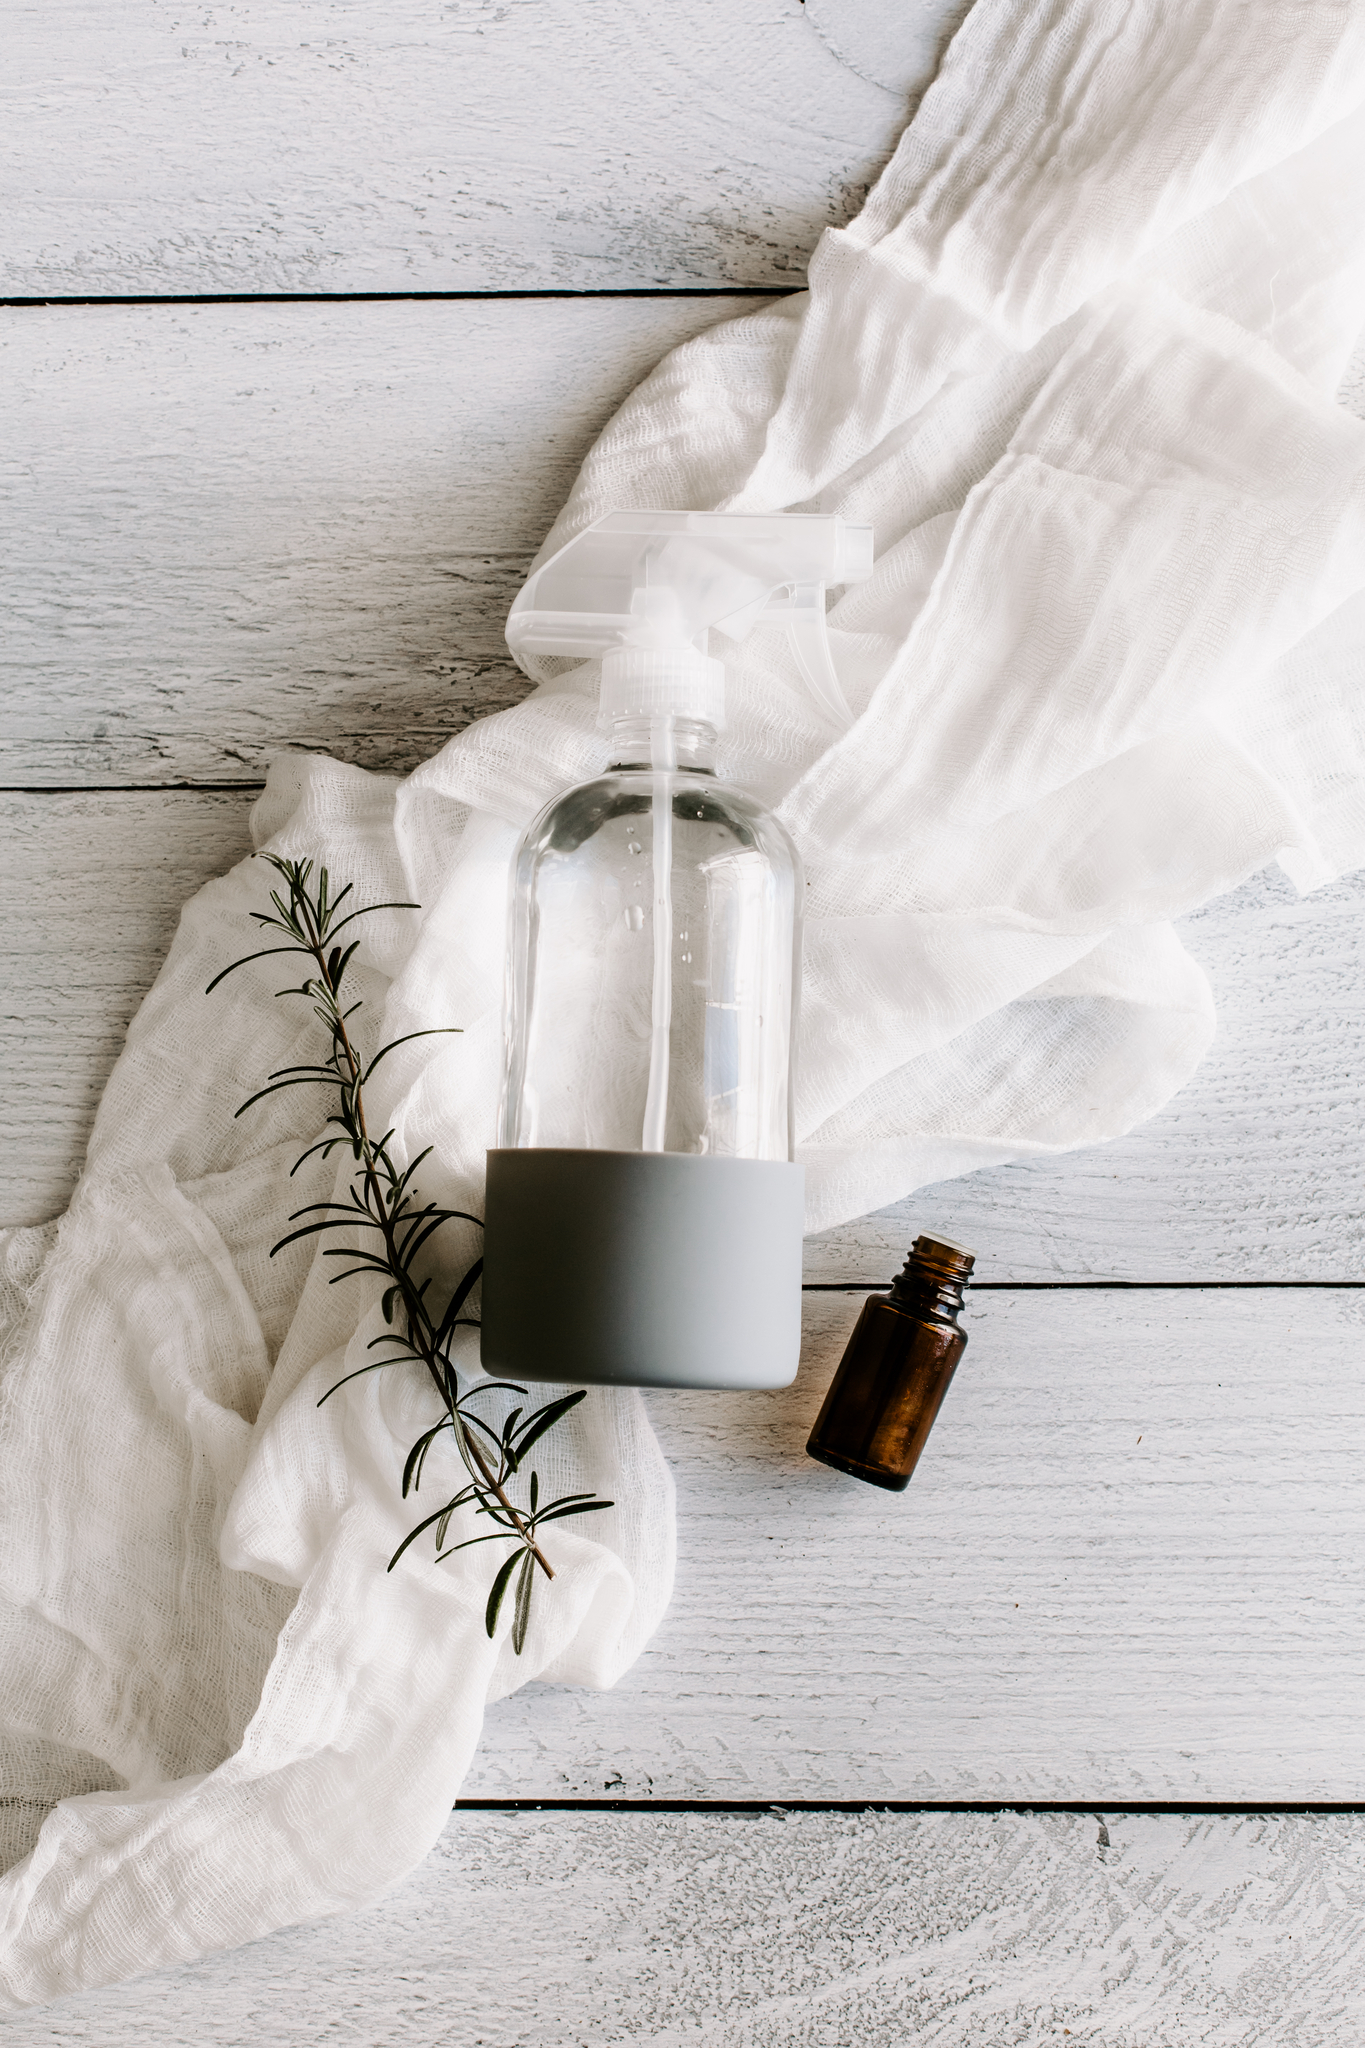 These Are the Best Essential Oils to Disinfect Your Home